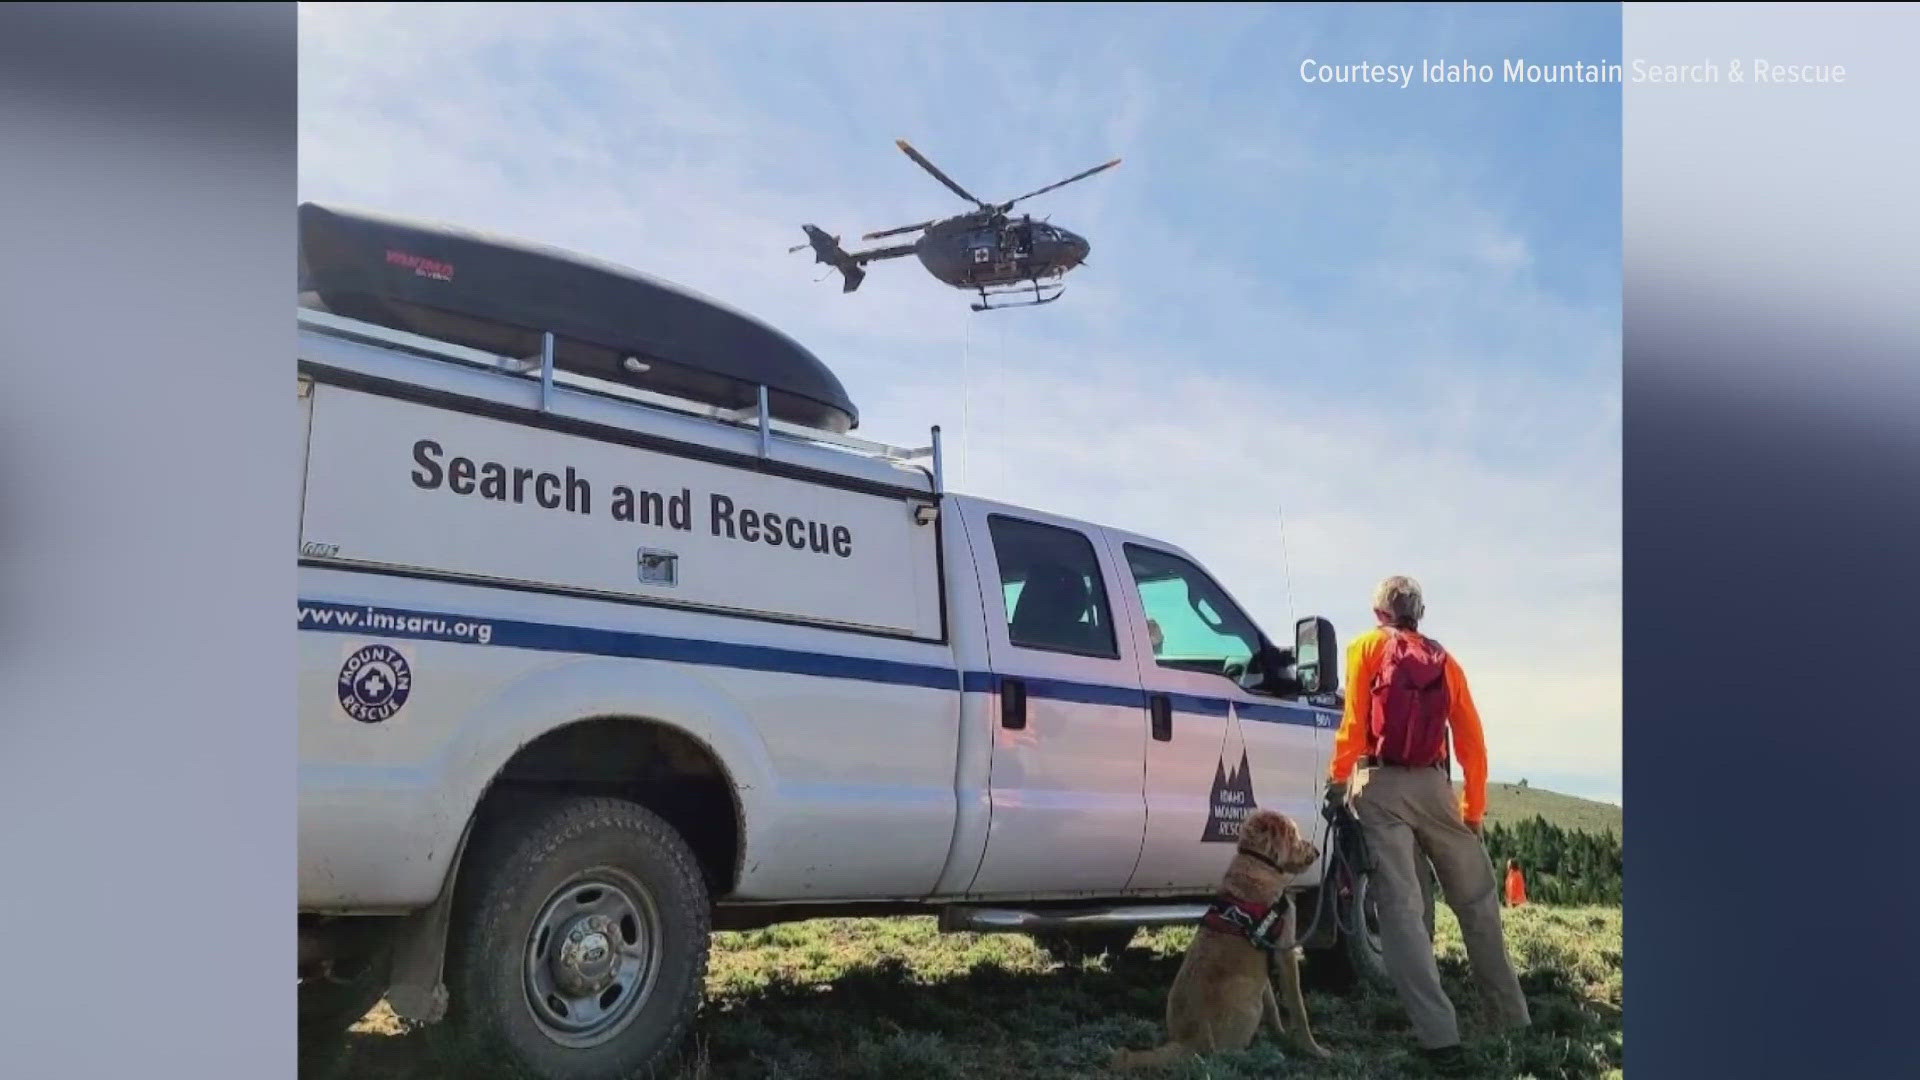 Idaho Mountain Search and Rescue is joining the annual online donation campaign that provides a way to connect with more than 600 Idaho nonprofits.